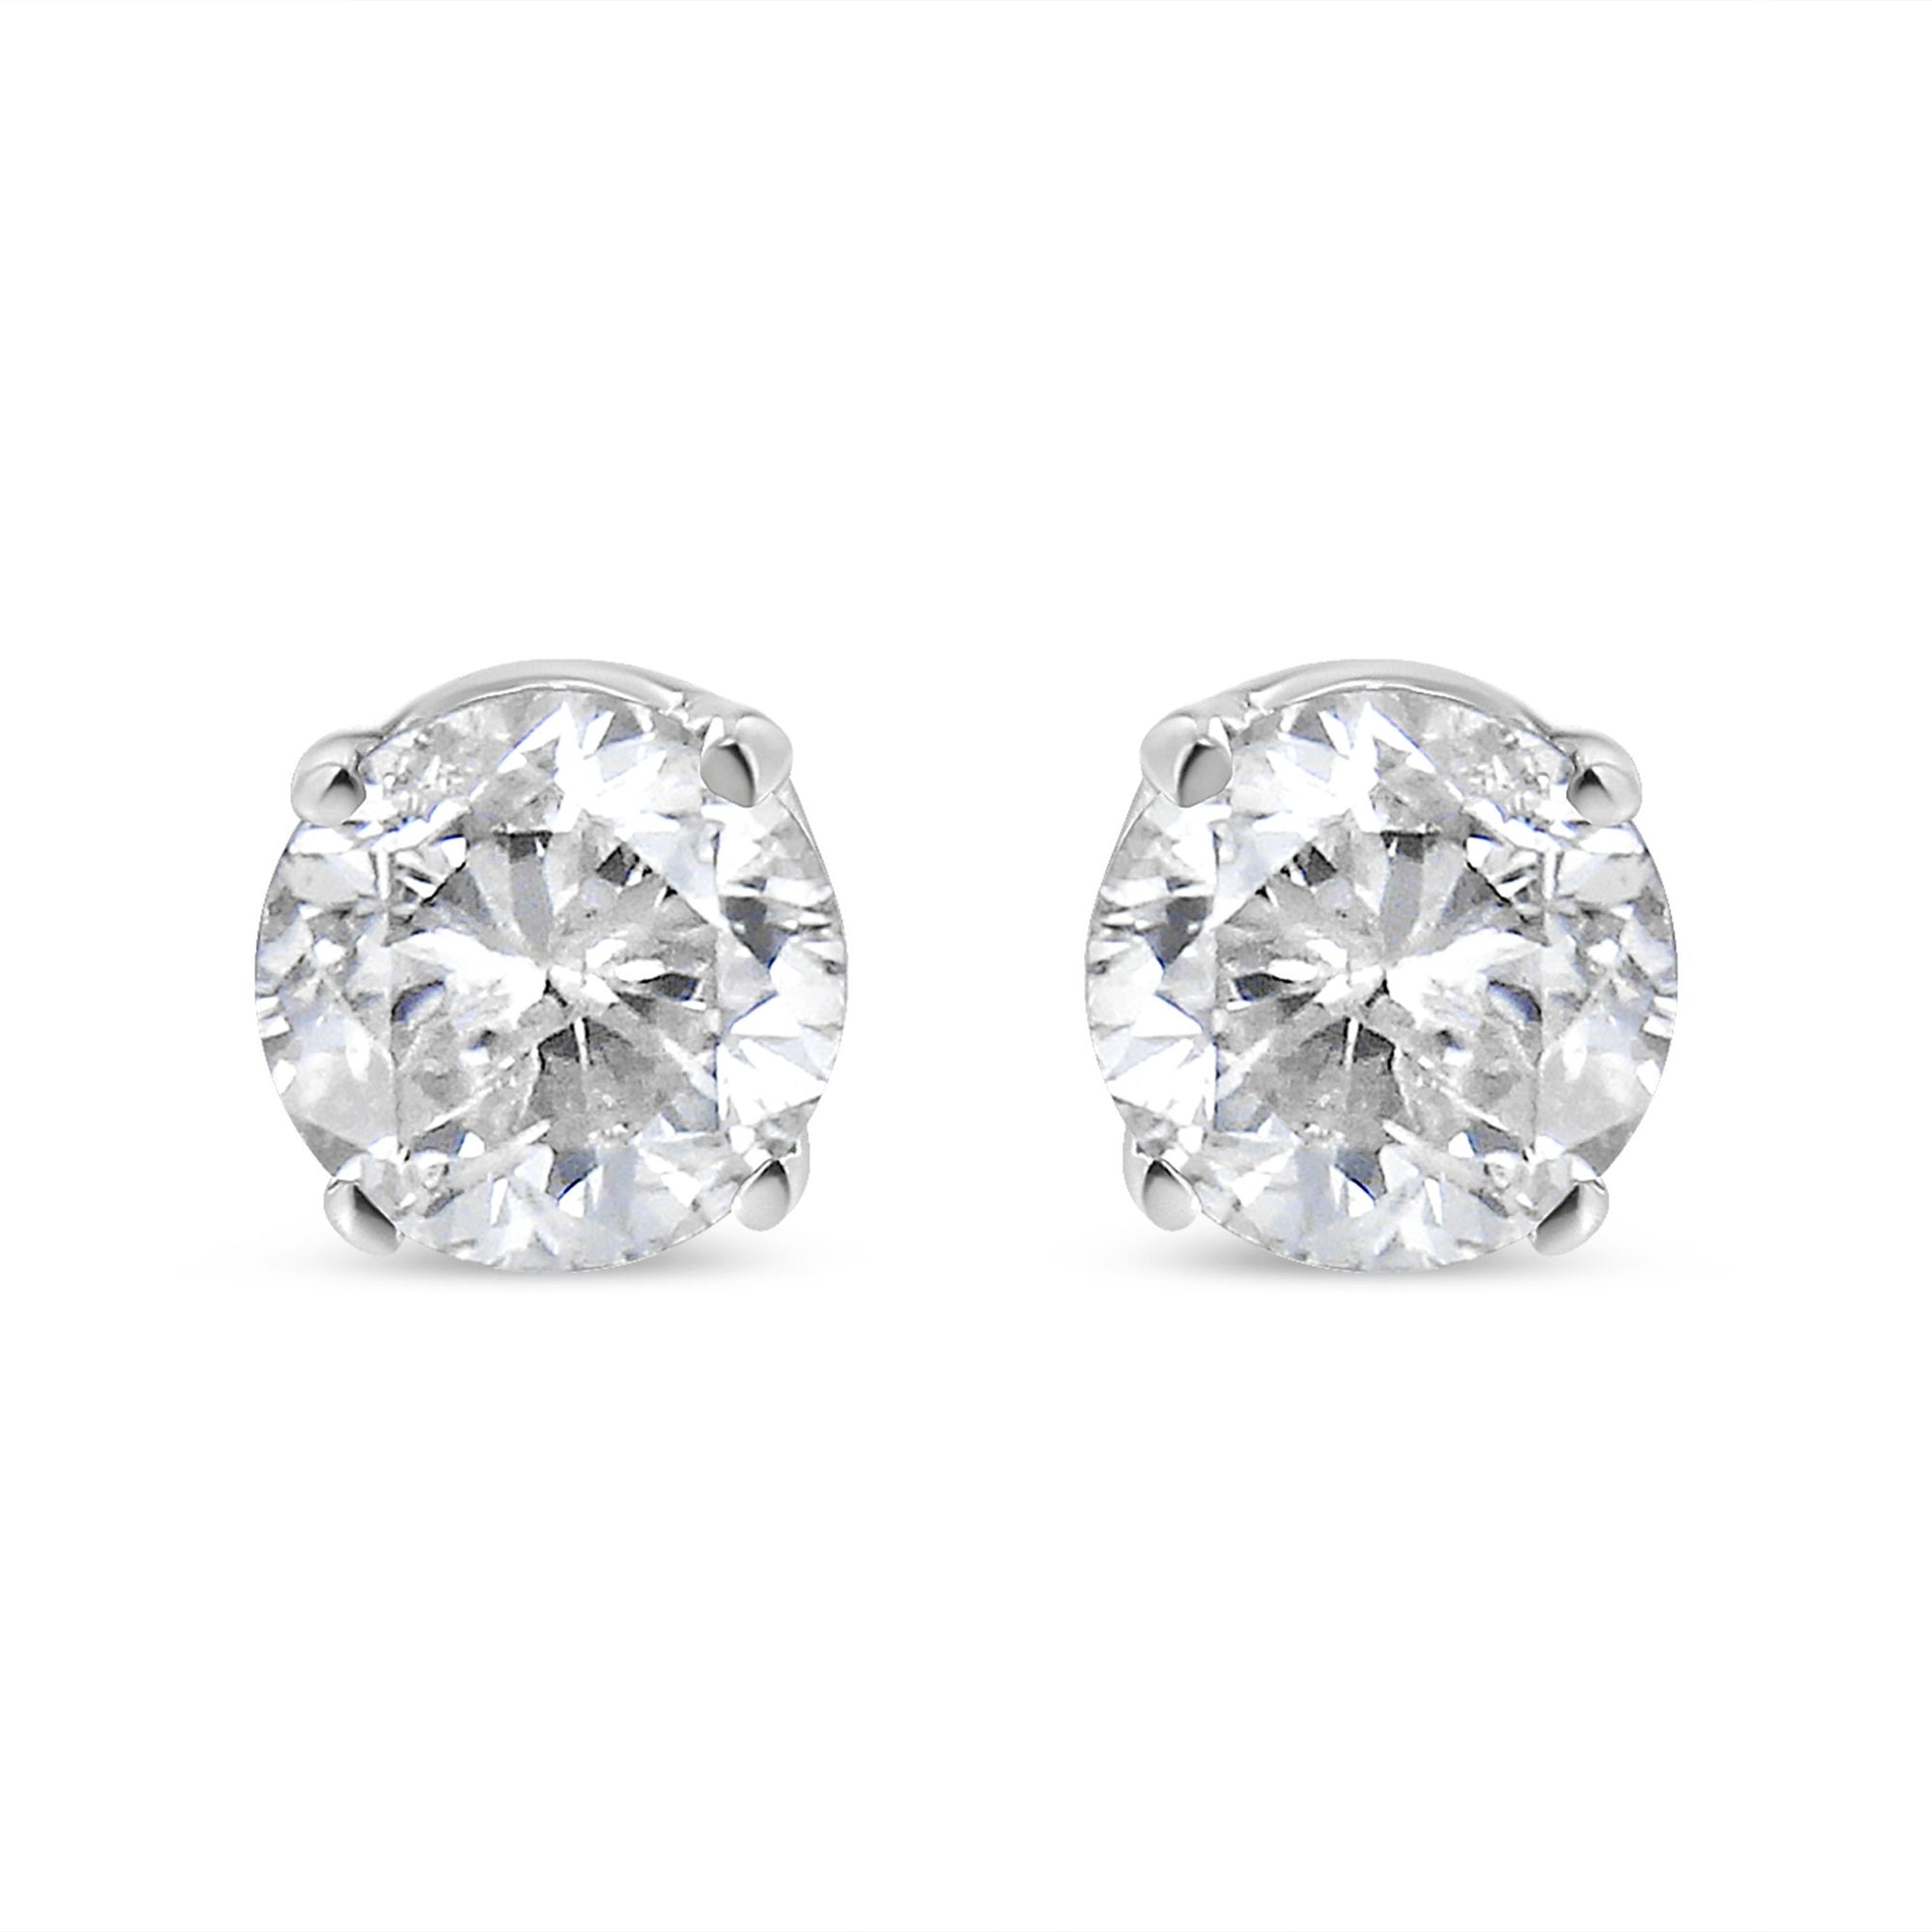 AGS Certified 14K White Gold 1.0 Cttw 4-Prong Set Brilliant Round-Cut Solitaire Diamond Push Back Stud Earrings (G-H Color, SI2-I1 Clarity) - LinkagejewelrydesignLinkagejewelrydesign